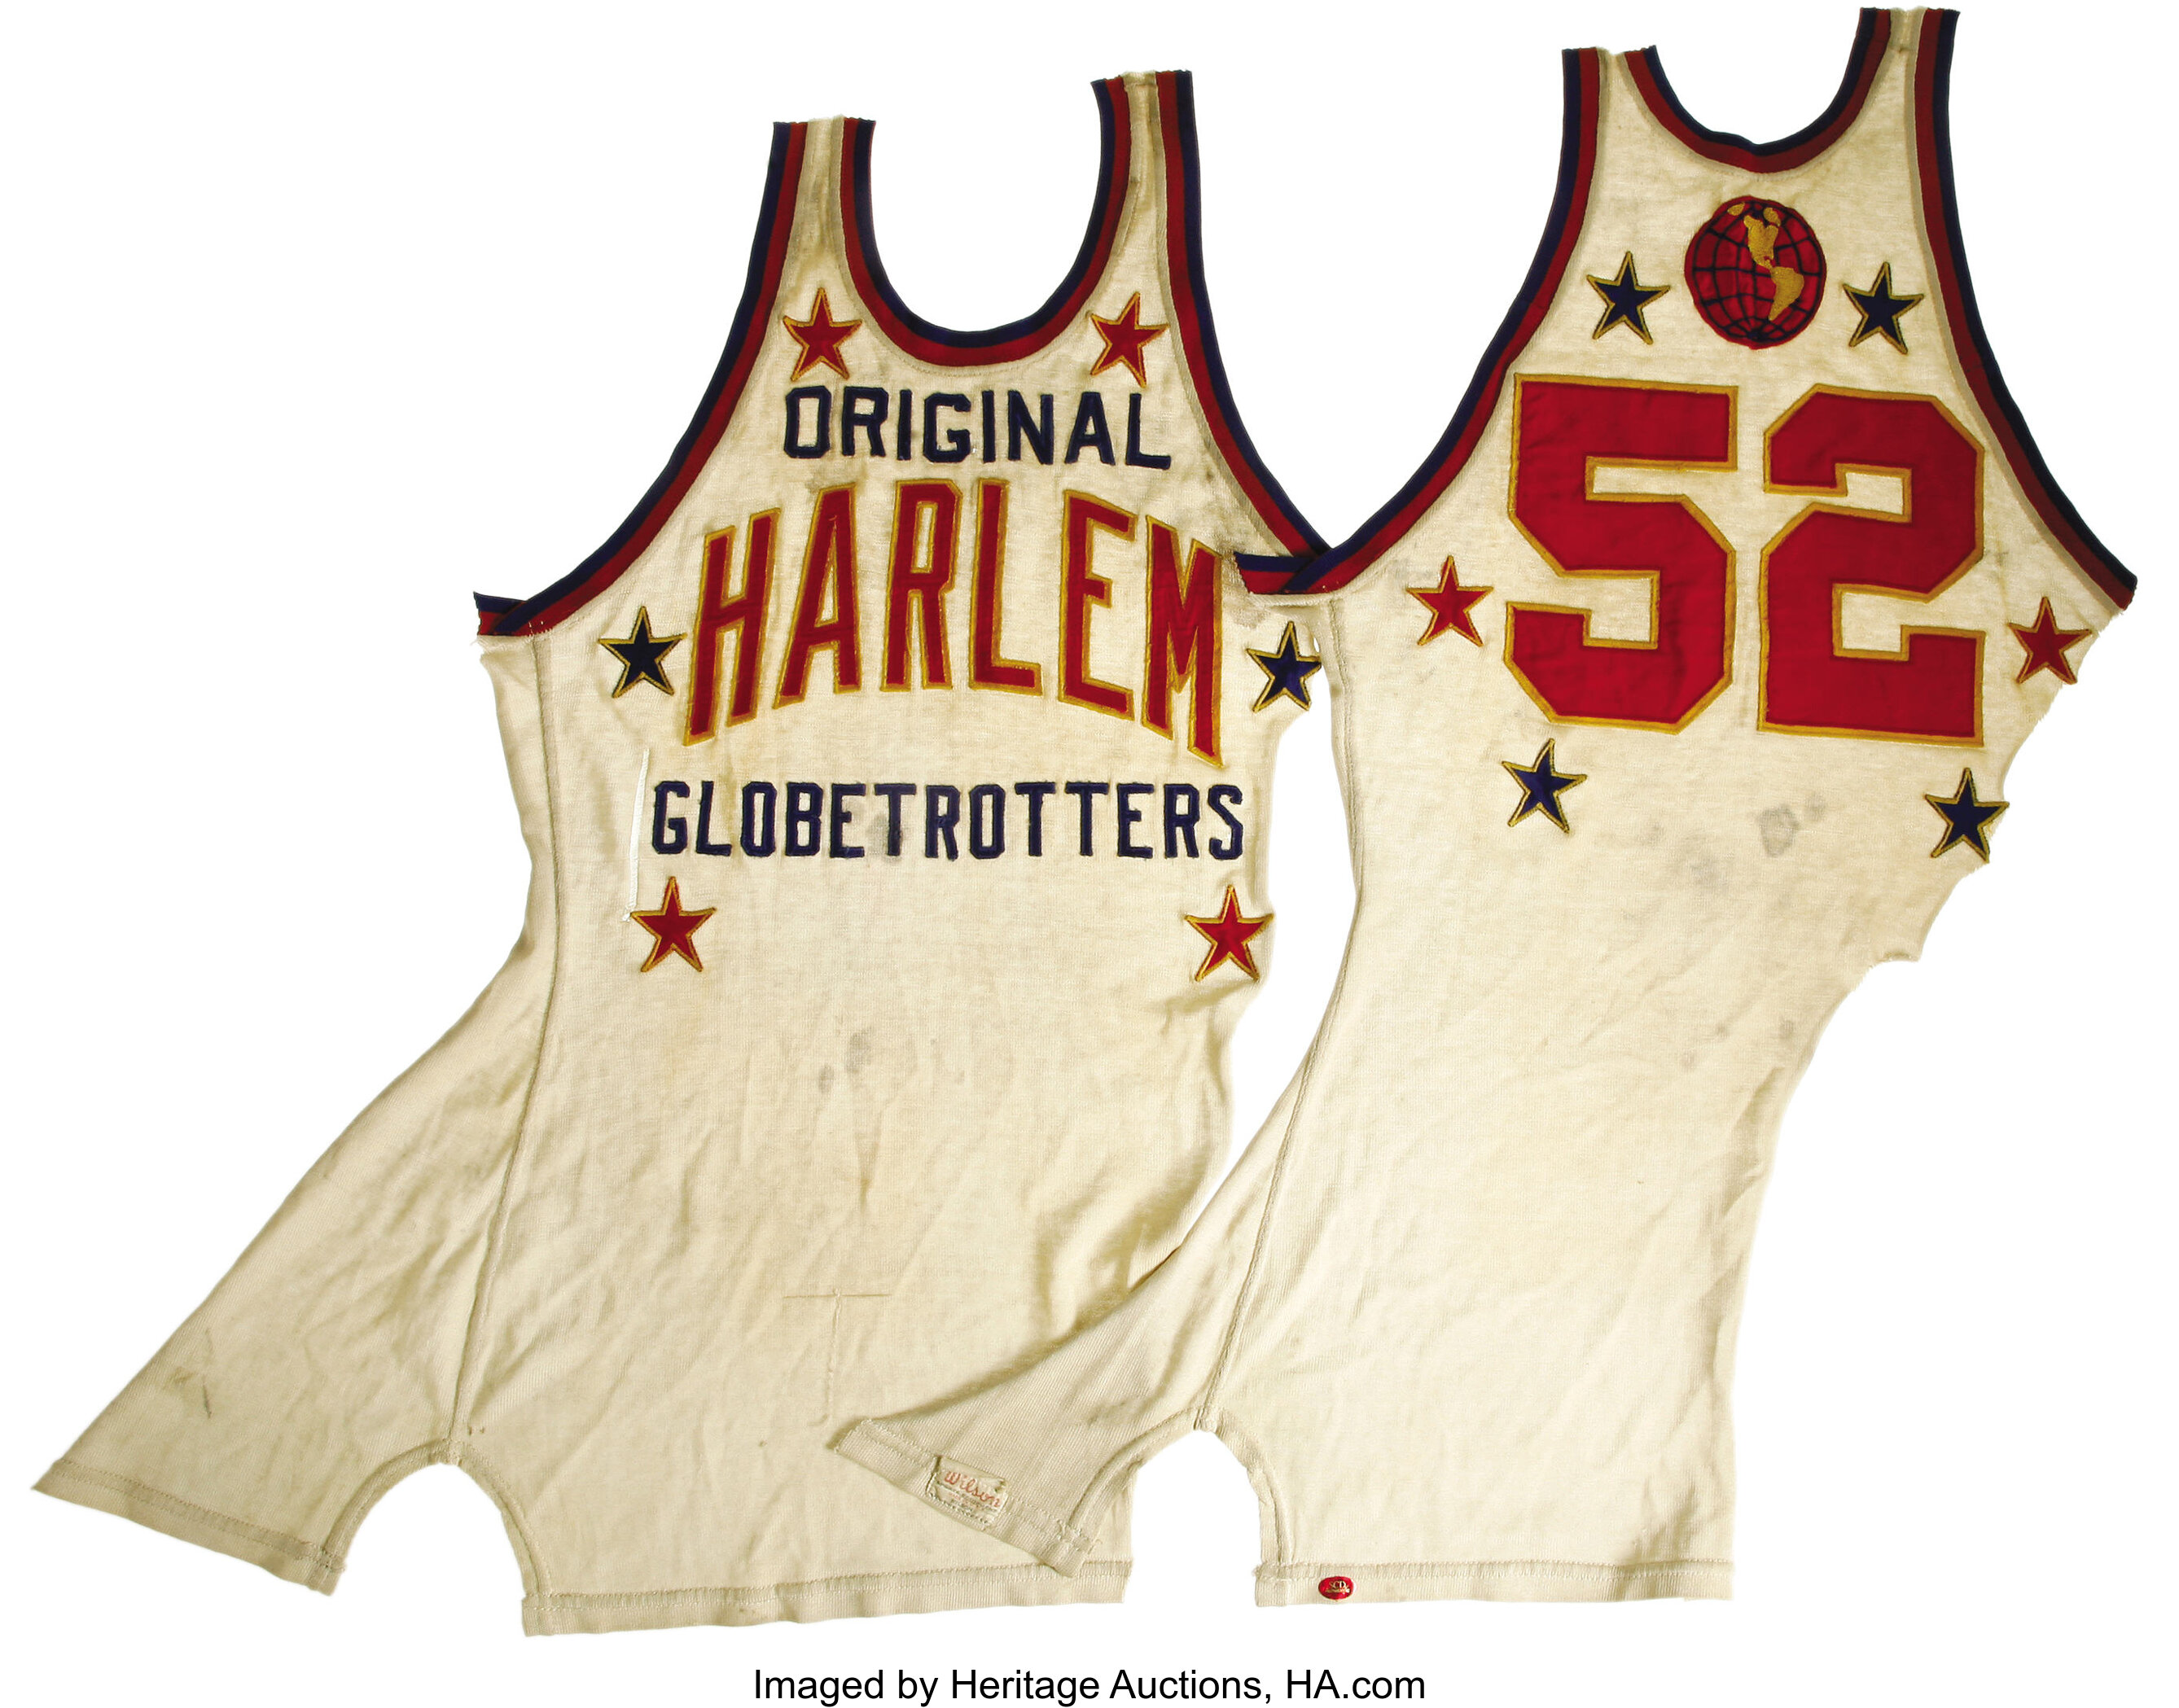 1958 Harlem Globetrotters Game Worn Jersey. So condition may not